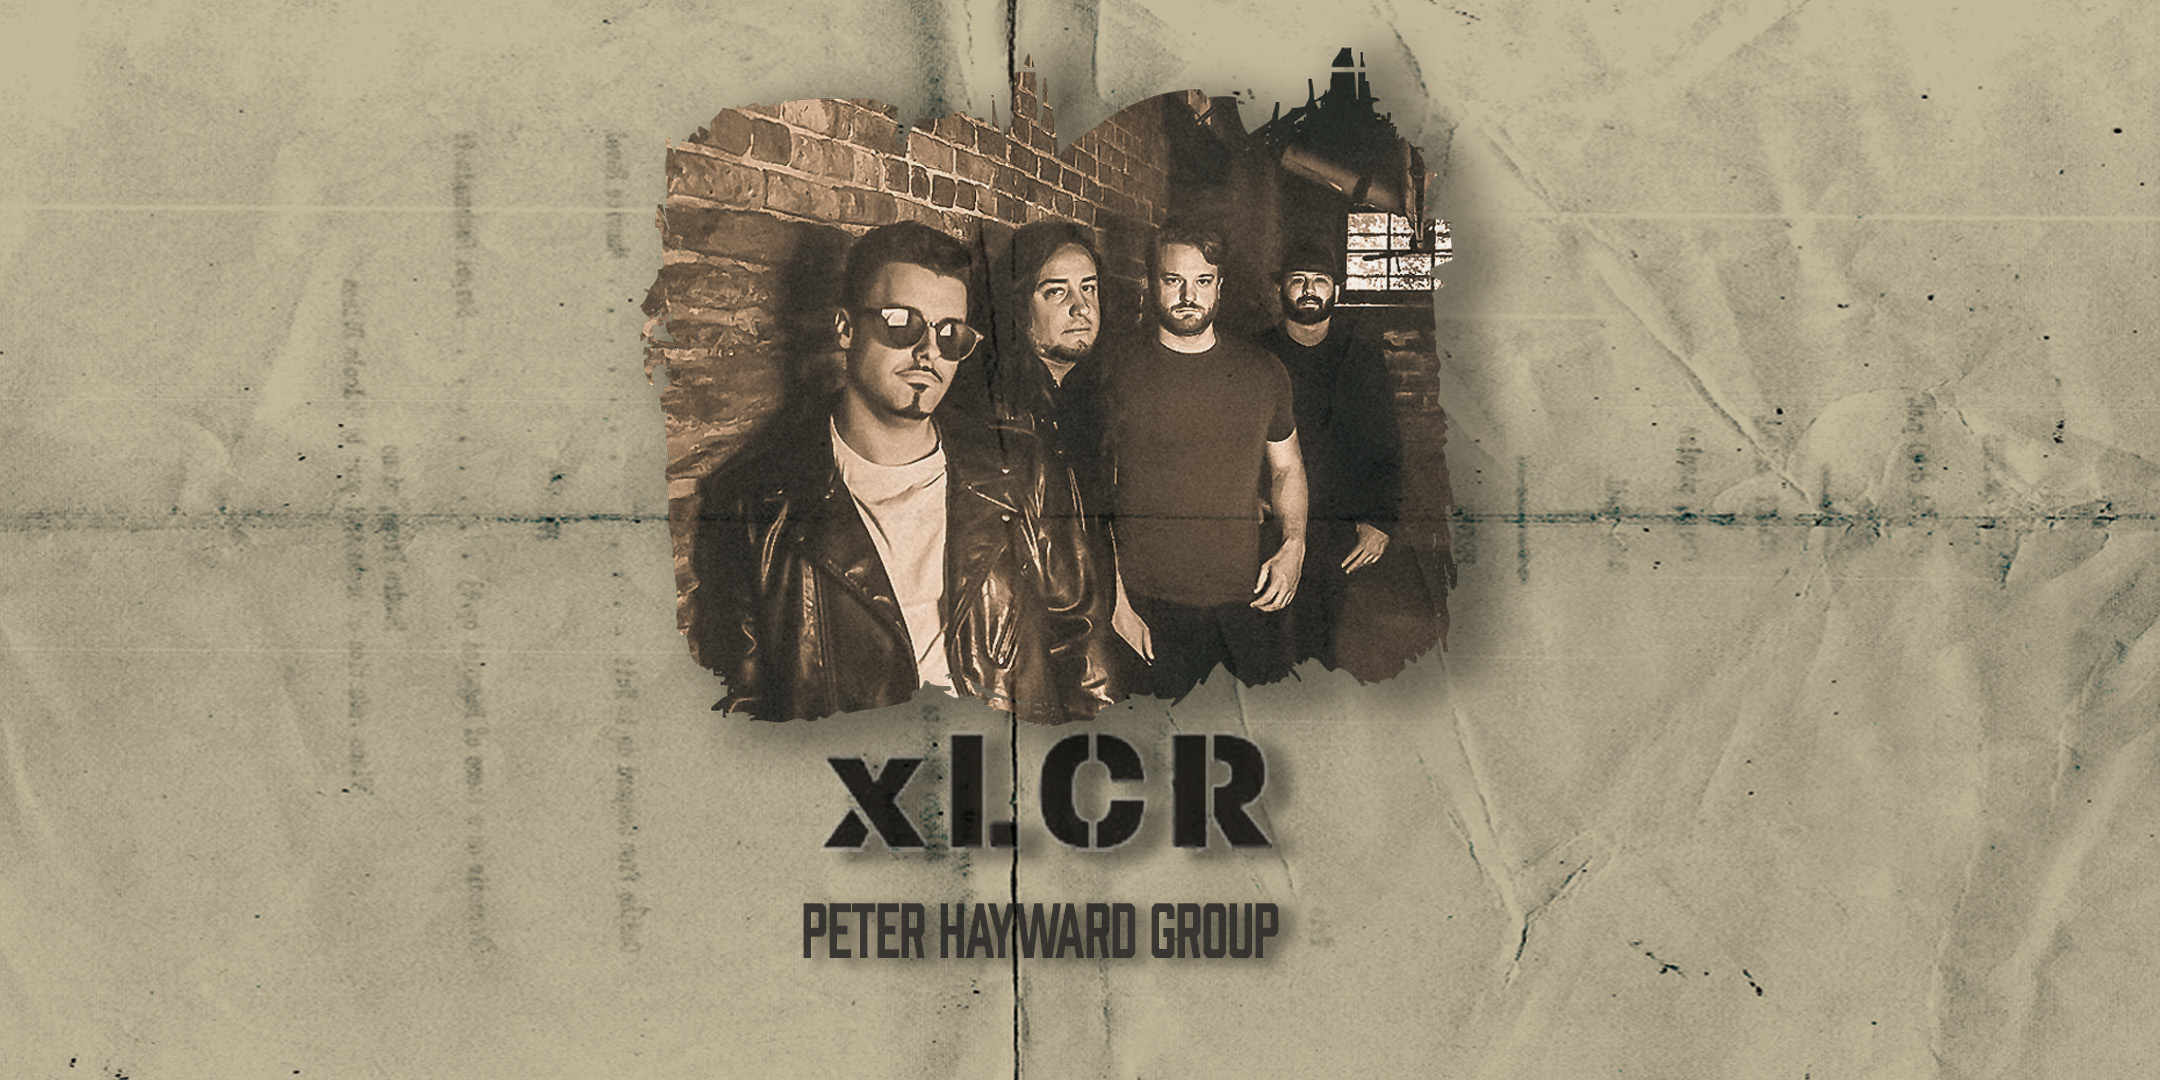 xLCR with Peter Hayward Group Friday, January 20 James Ballentine "Uptown" VFW Post 246 Doors 7:00pm :: Music 7:30pm :: 21+ GA $5 ADV / $10 DOS NO REFUNDS